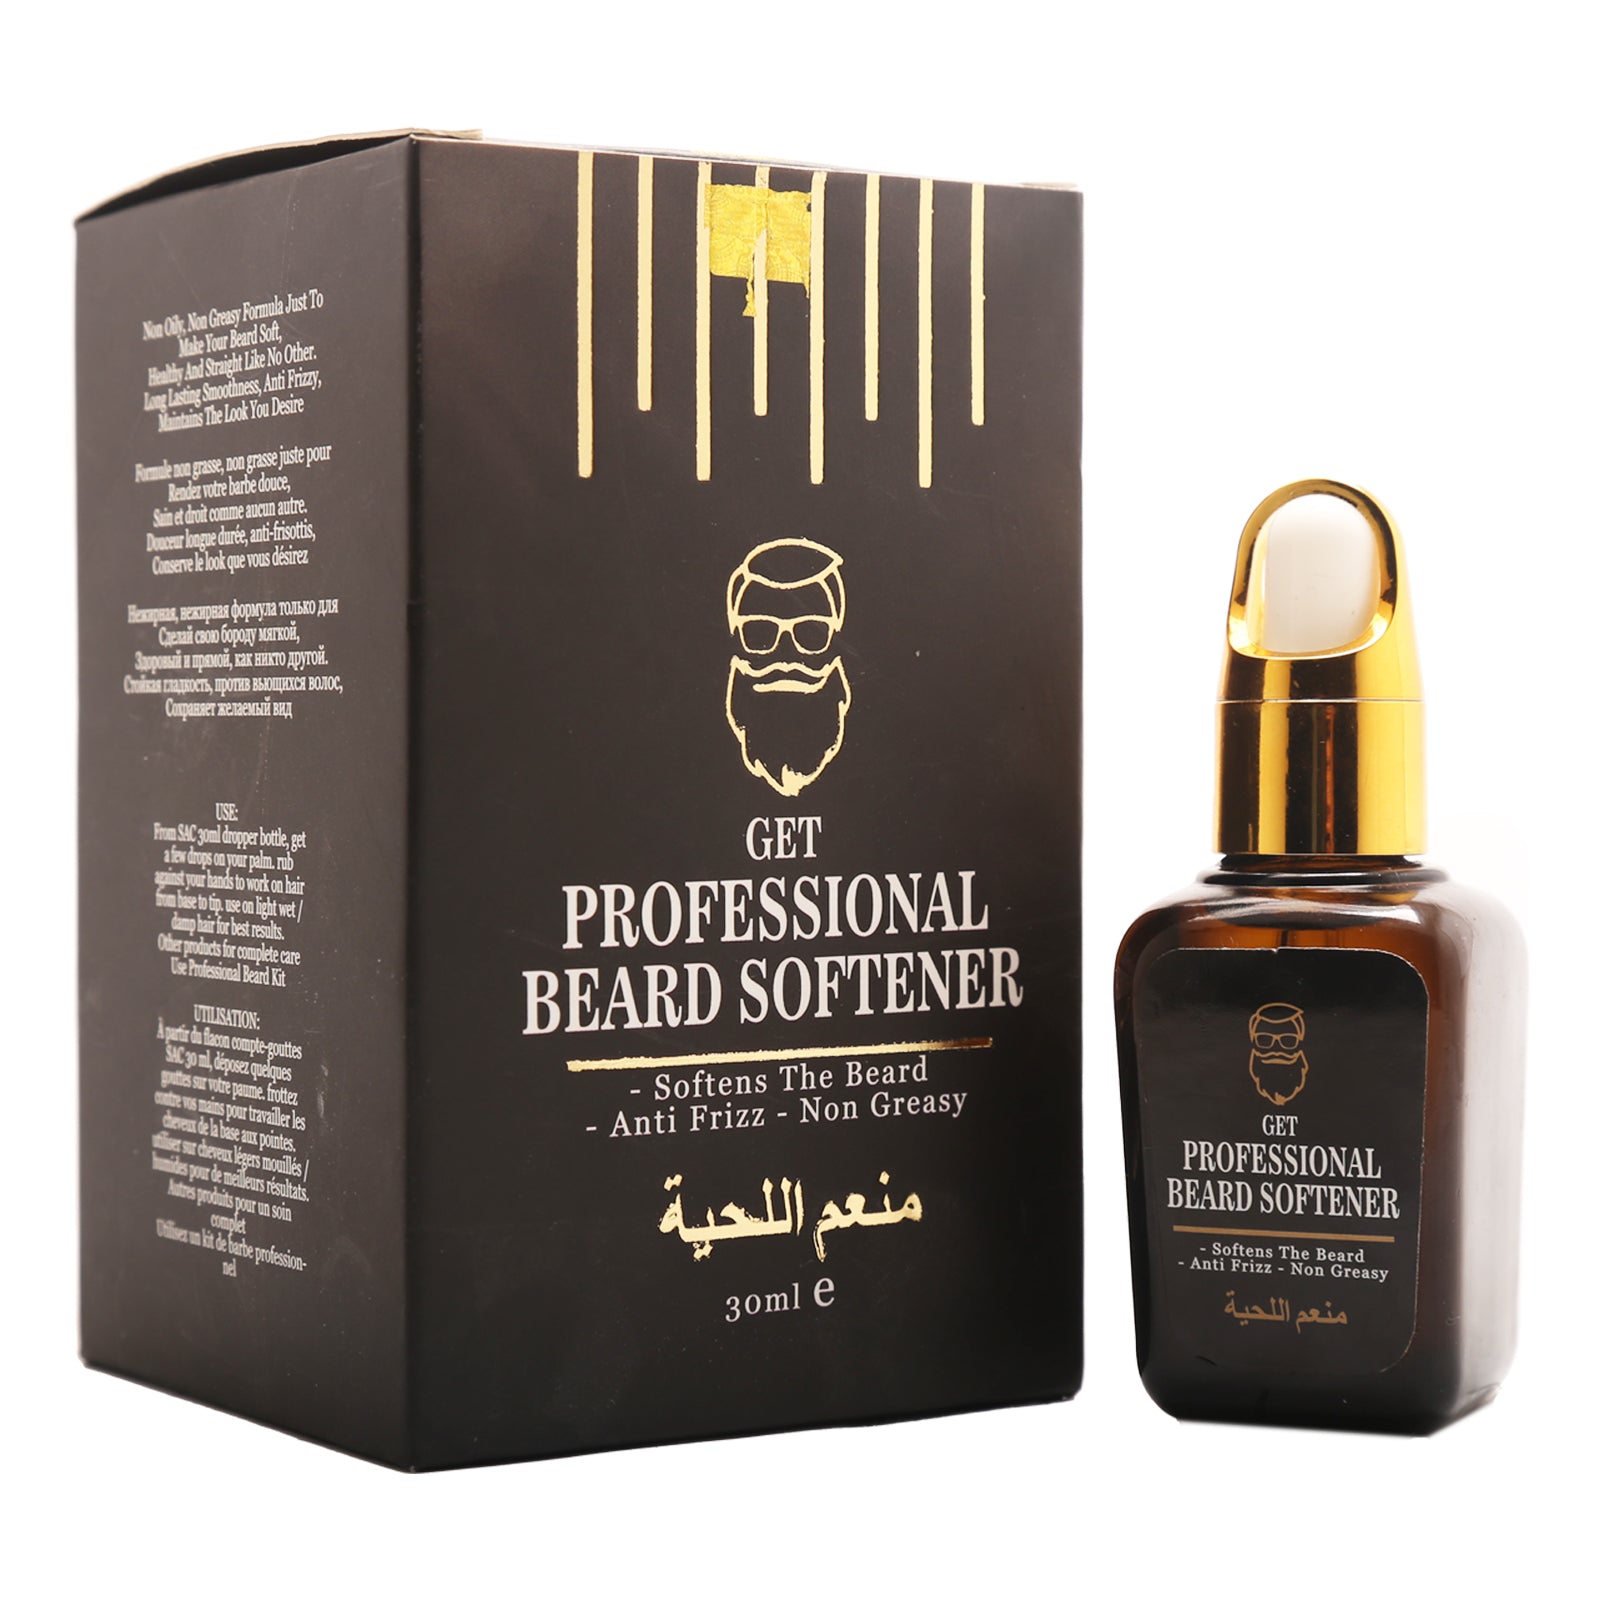 Professional Beard Softener Serum - 30ml - The Best Thing to Maintain an Itchy Beard